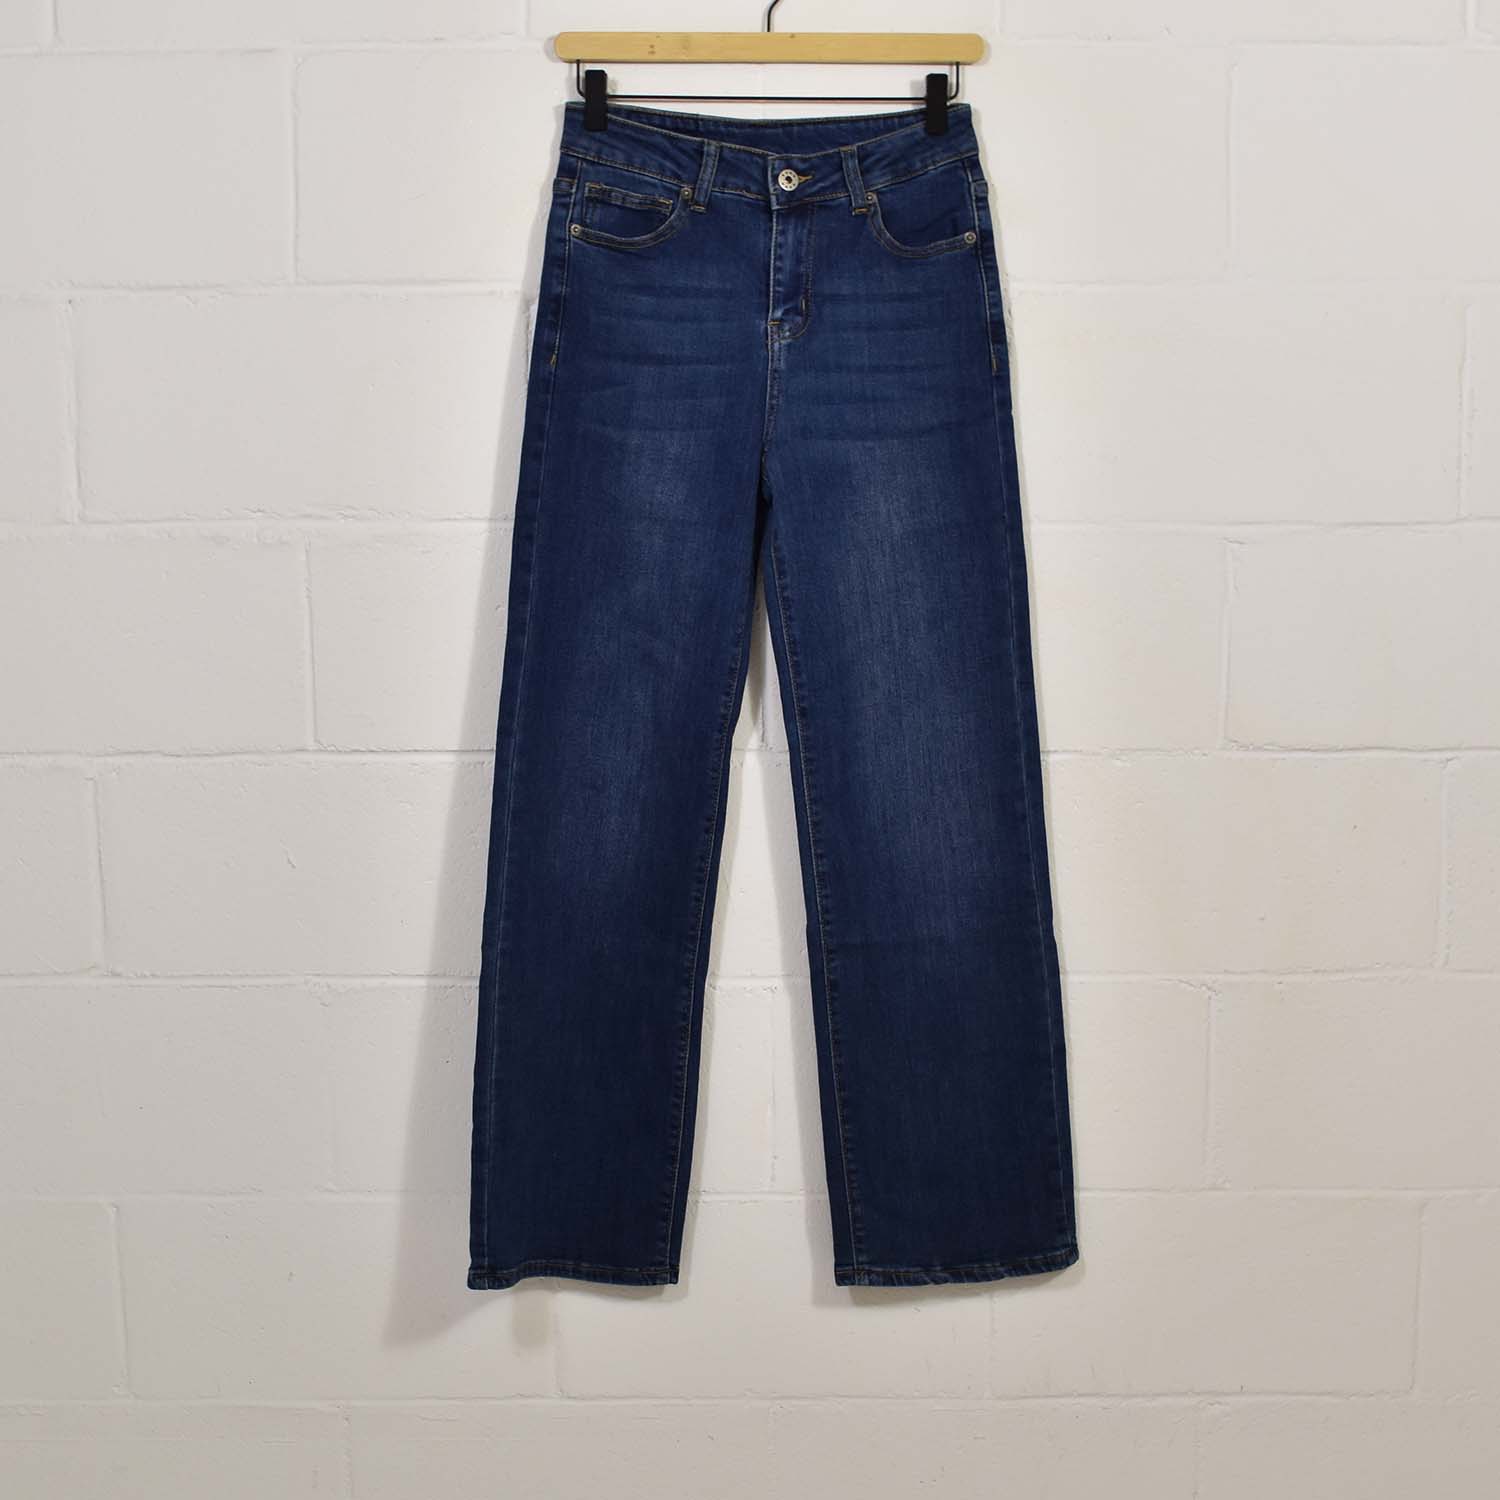 Jeans jambe large